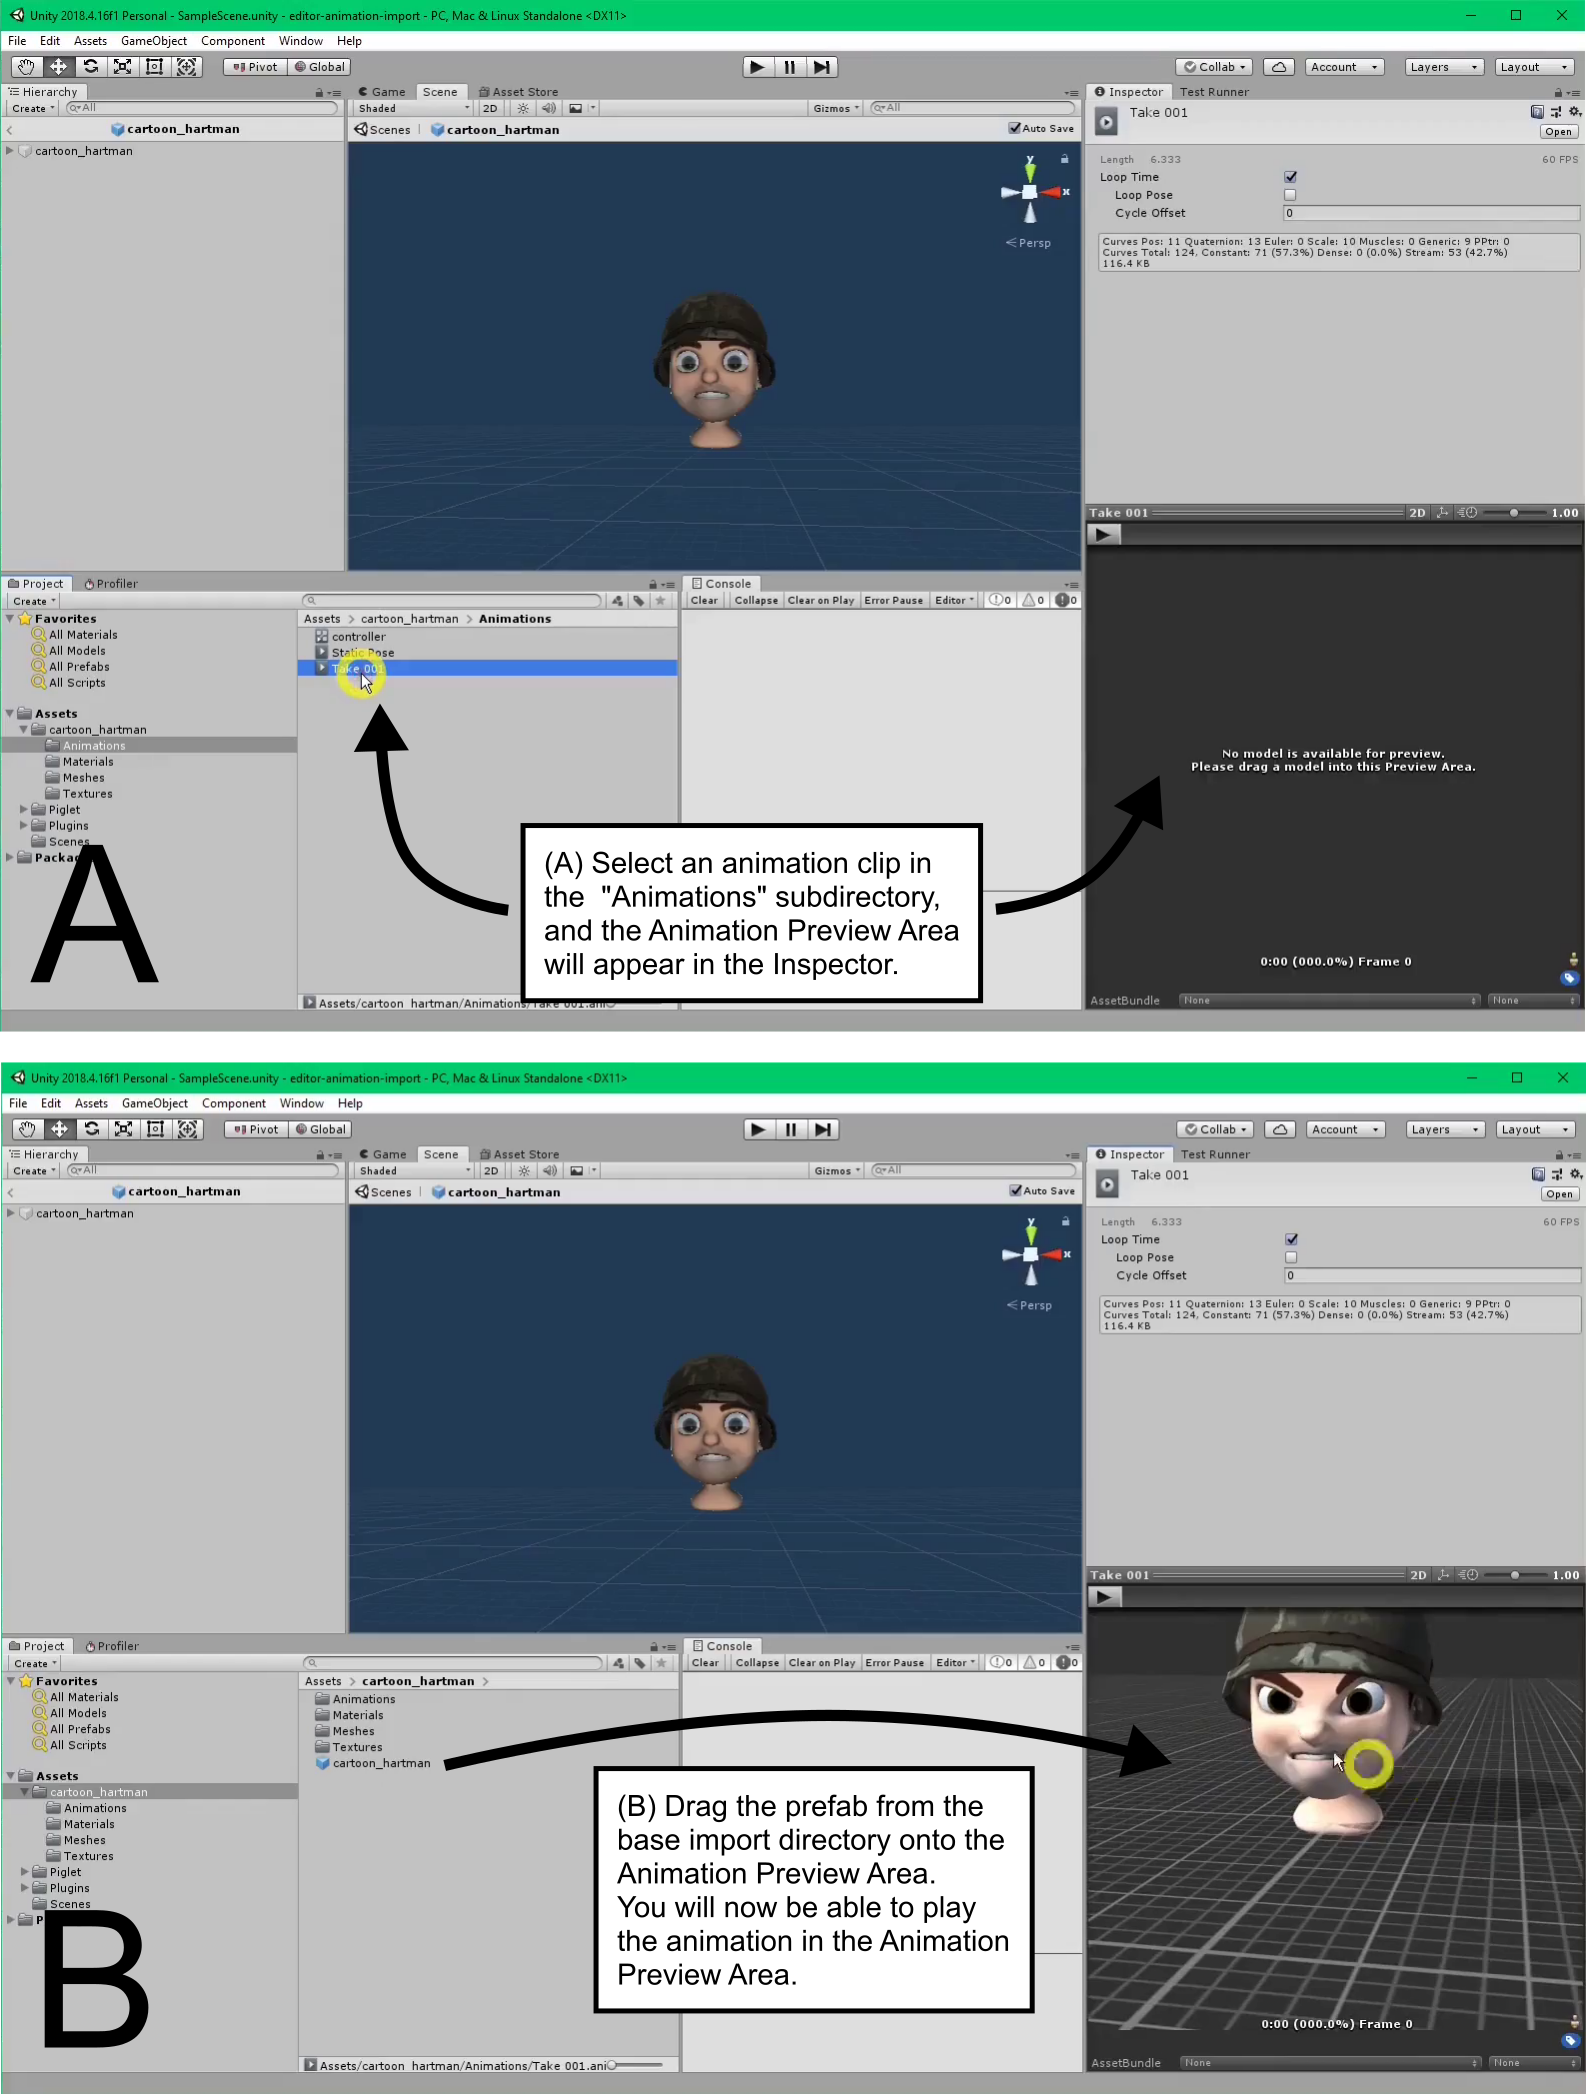 Figure 3: Previewing an animation clip in the Editor. (A) The user selects an animation clip in the “Animations” subdirectory, causing the Animation Preview Area to appear in the Inspector (bottom right). (B) The user drags the prefab for the model from the main import directory onto the Animation Preview Area, in order to associate the model with the animation clip. Having established this link, the user is able to preview the animation by clicking the Play button in the Animation Preview Area. Attribution: These screenshots depict the “Cartoon Hartman” model by Willy Decarpentrie, skudgee@sketchfab, CC Attribution License.